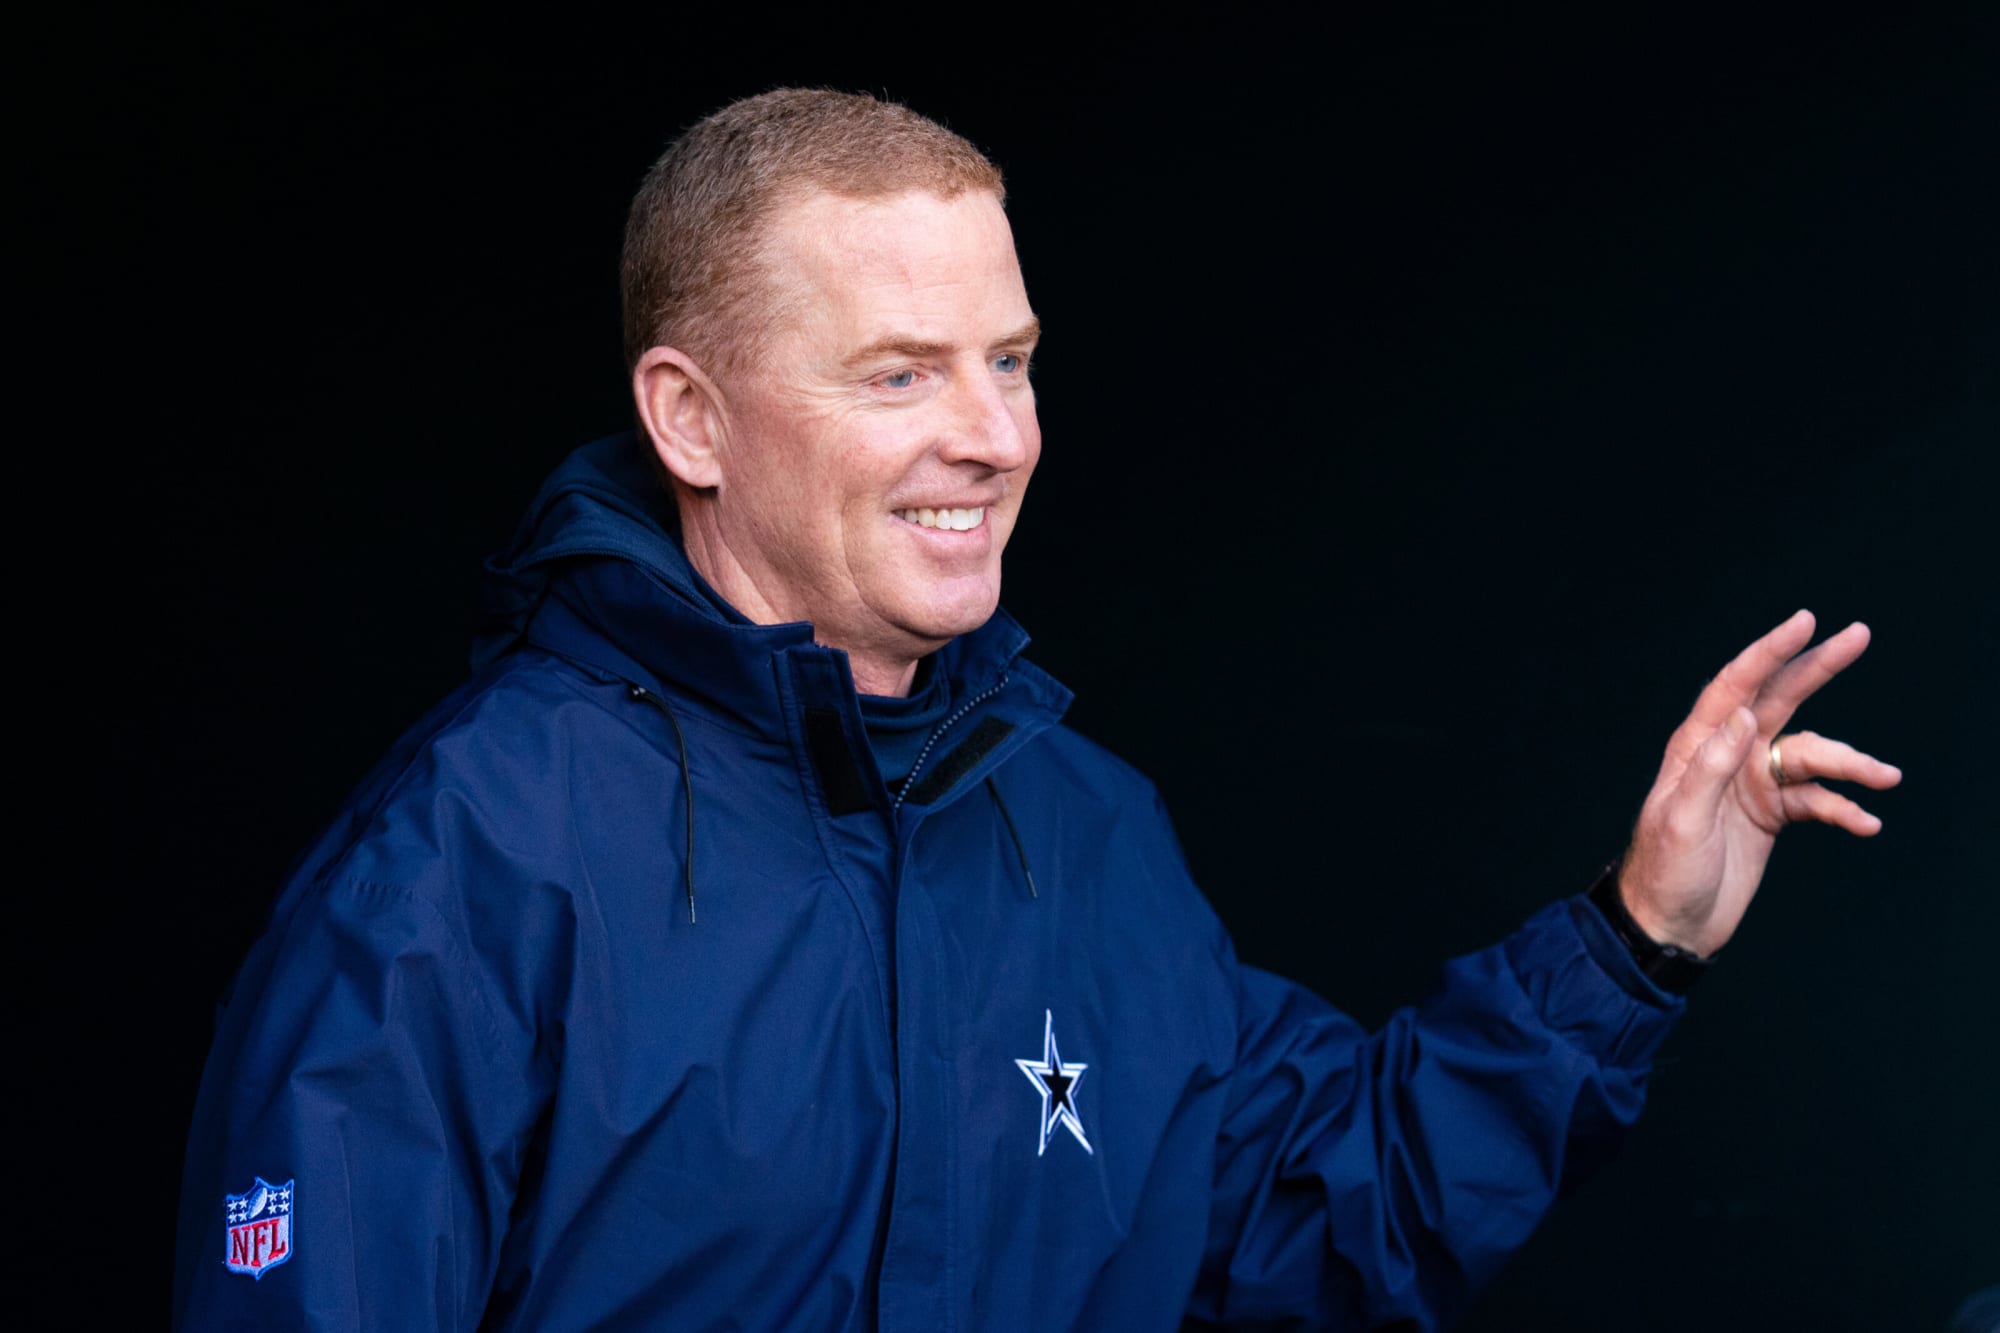 NBC is reportedly considering Jason Garrett to replace Drew Brees